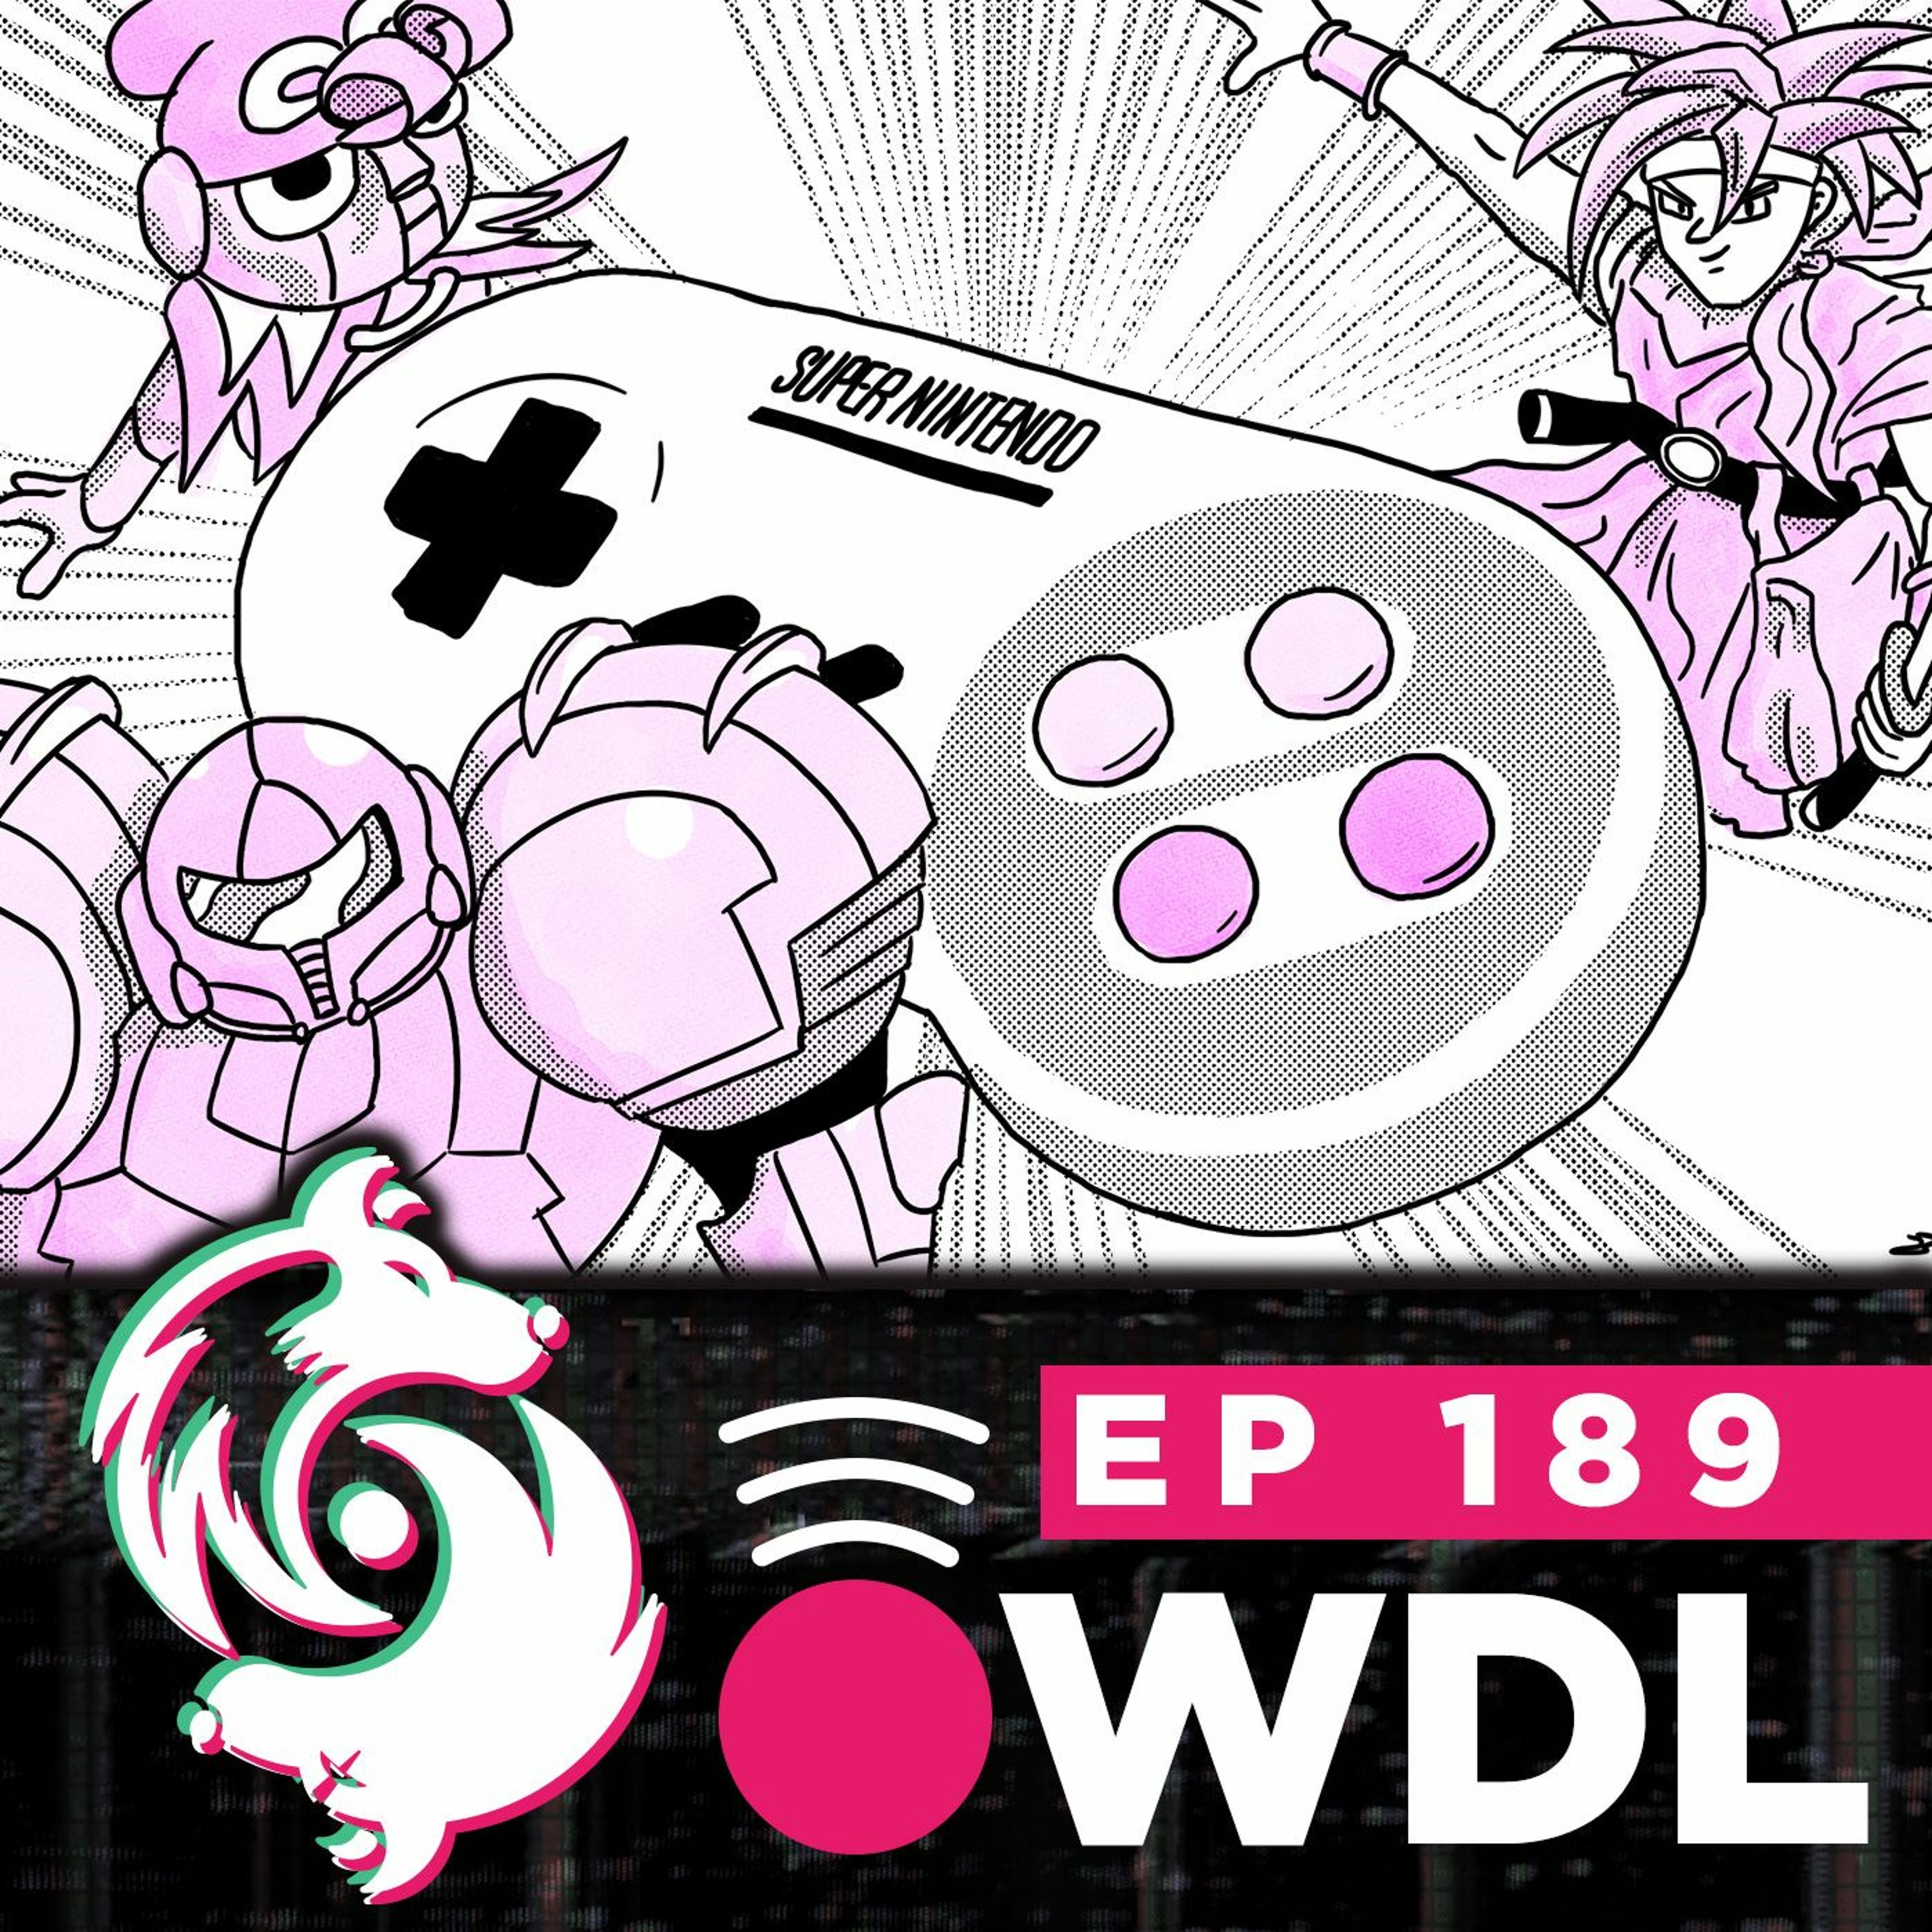 Nintendo making their own SNES controller for the Switch - WDL Ep 189